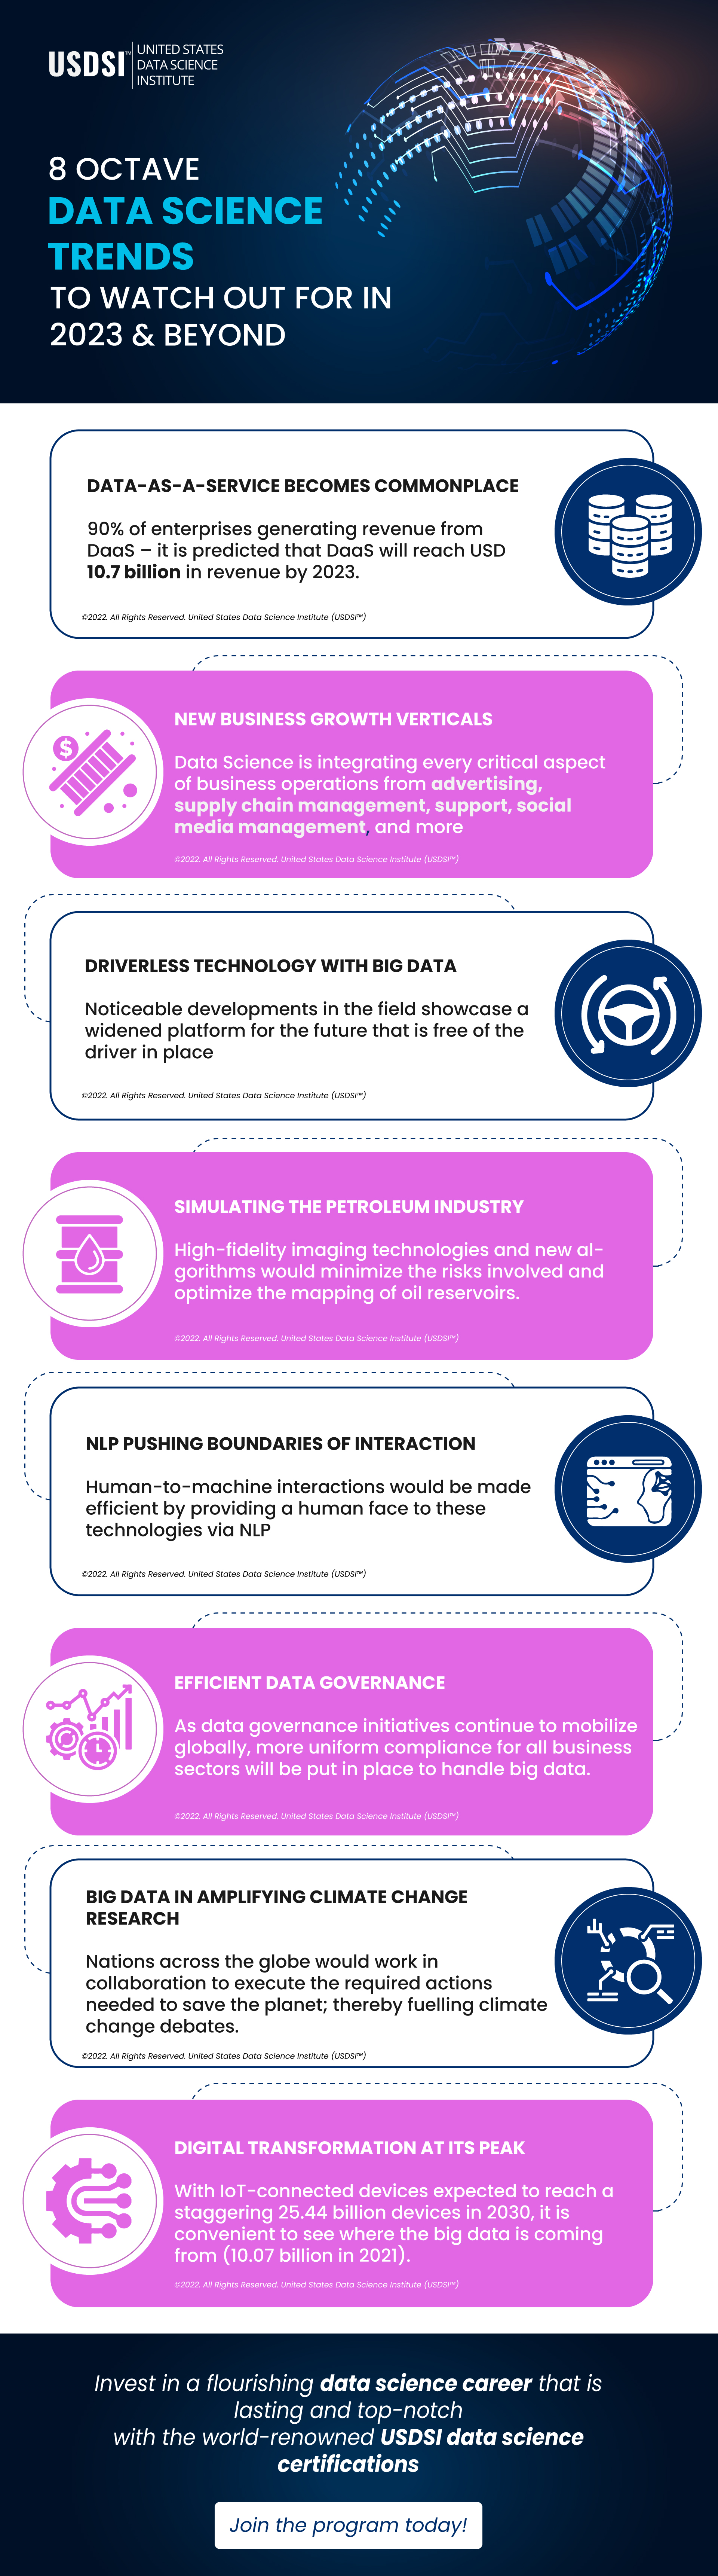 8-octave-data-science-trends-to-watch-out-for-in-2023-and-beyond-Infographic